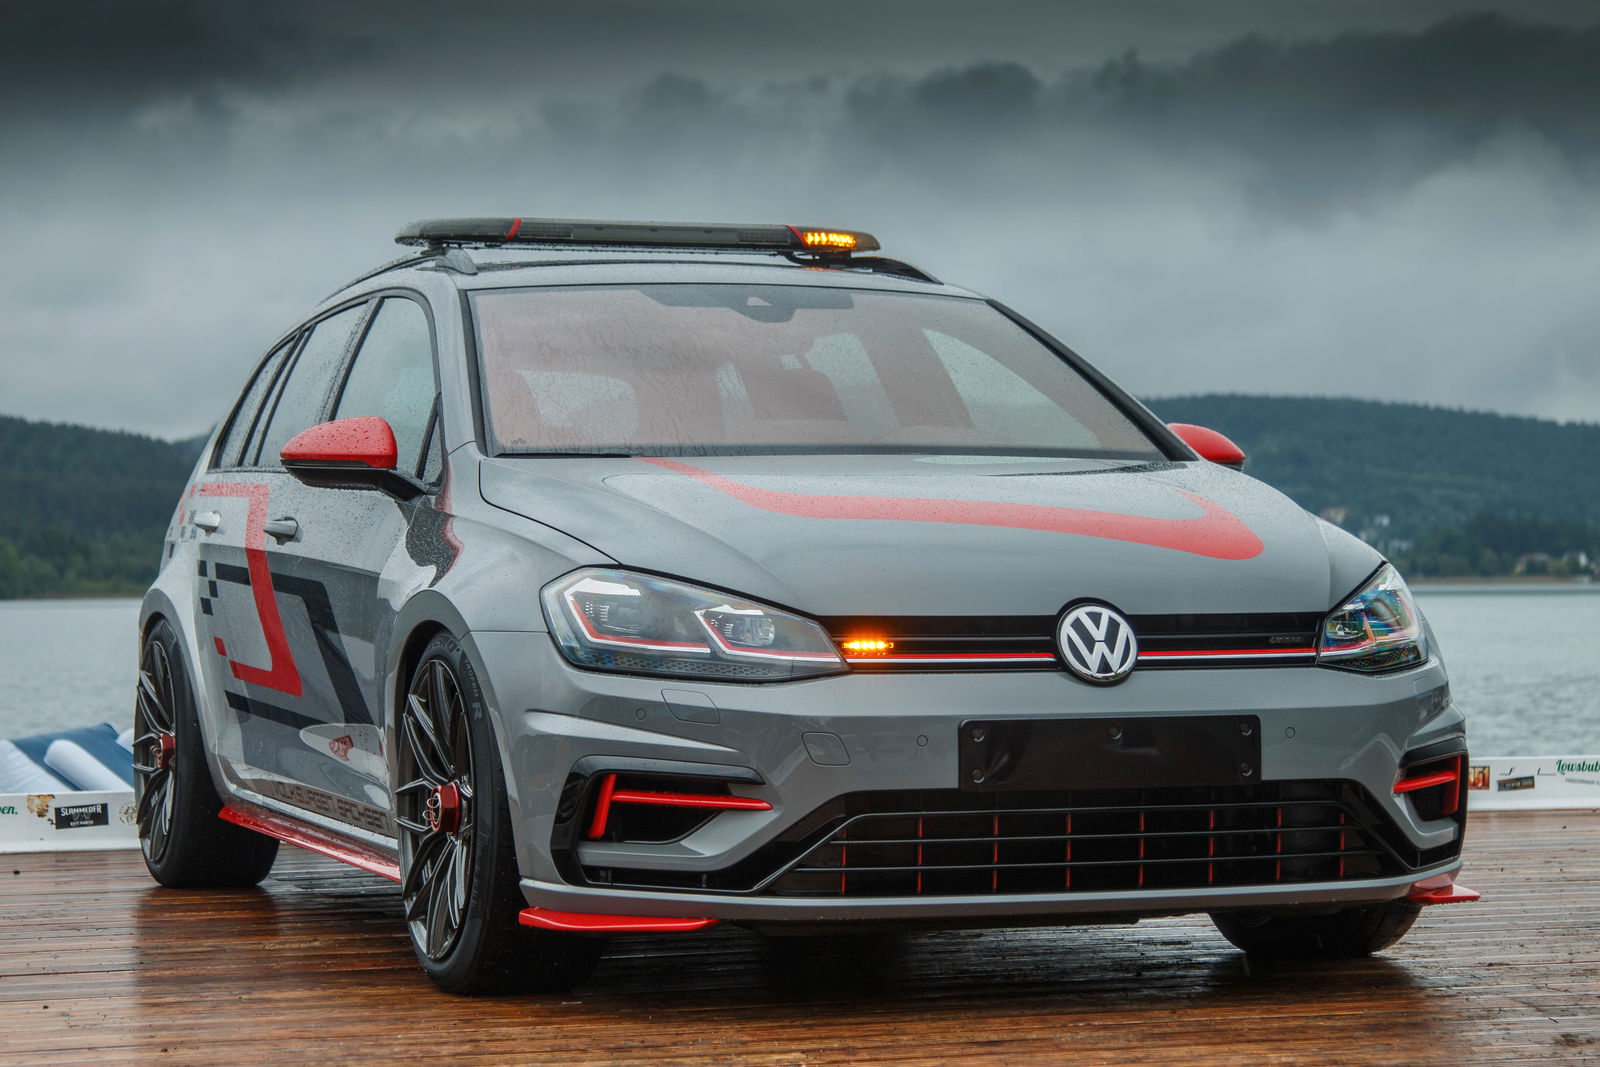 Double debut at the GTI gathering: Apprentices from Wolfsburg and Zwickau present self-developed Golf showcars Aurora and FighteR